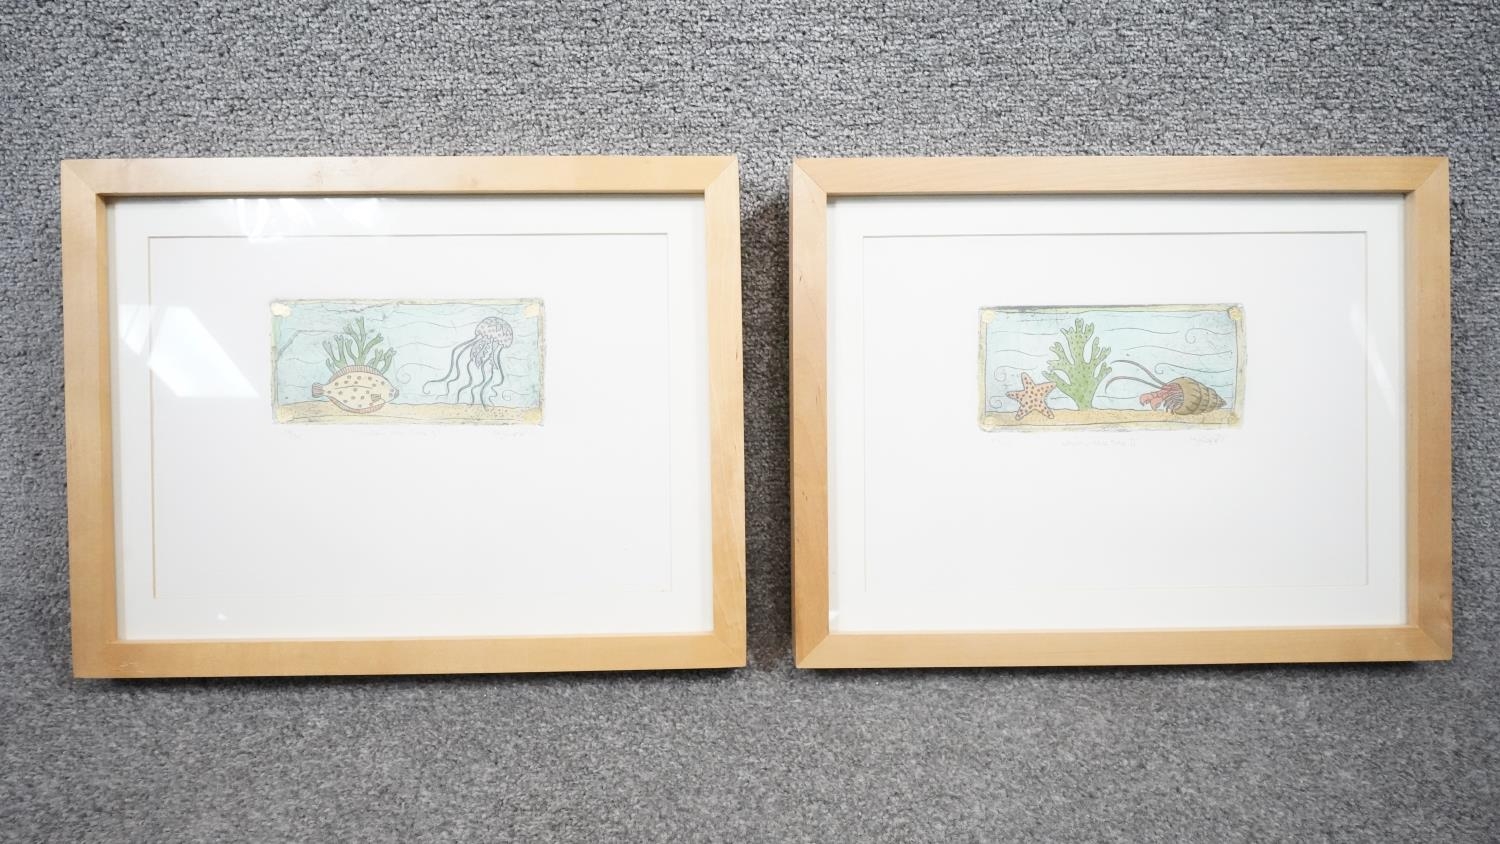 Two framed and glazed signed limited edition sea life prints signed M. J. Epps. One of a starfish